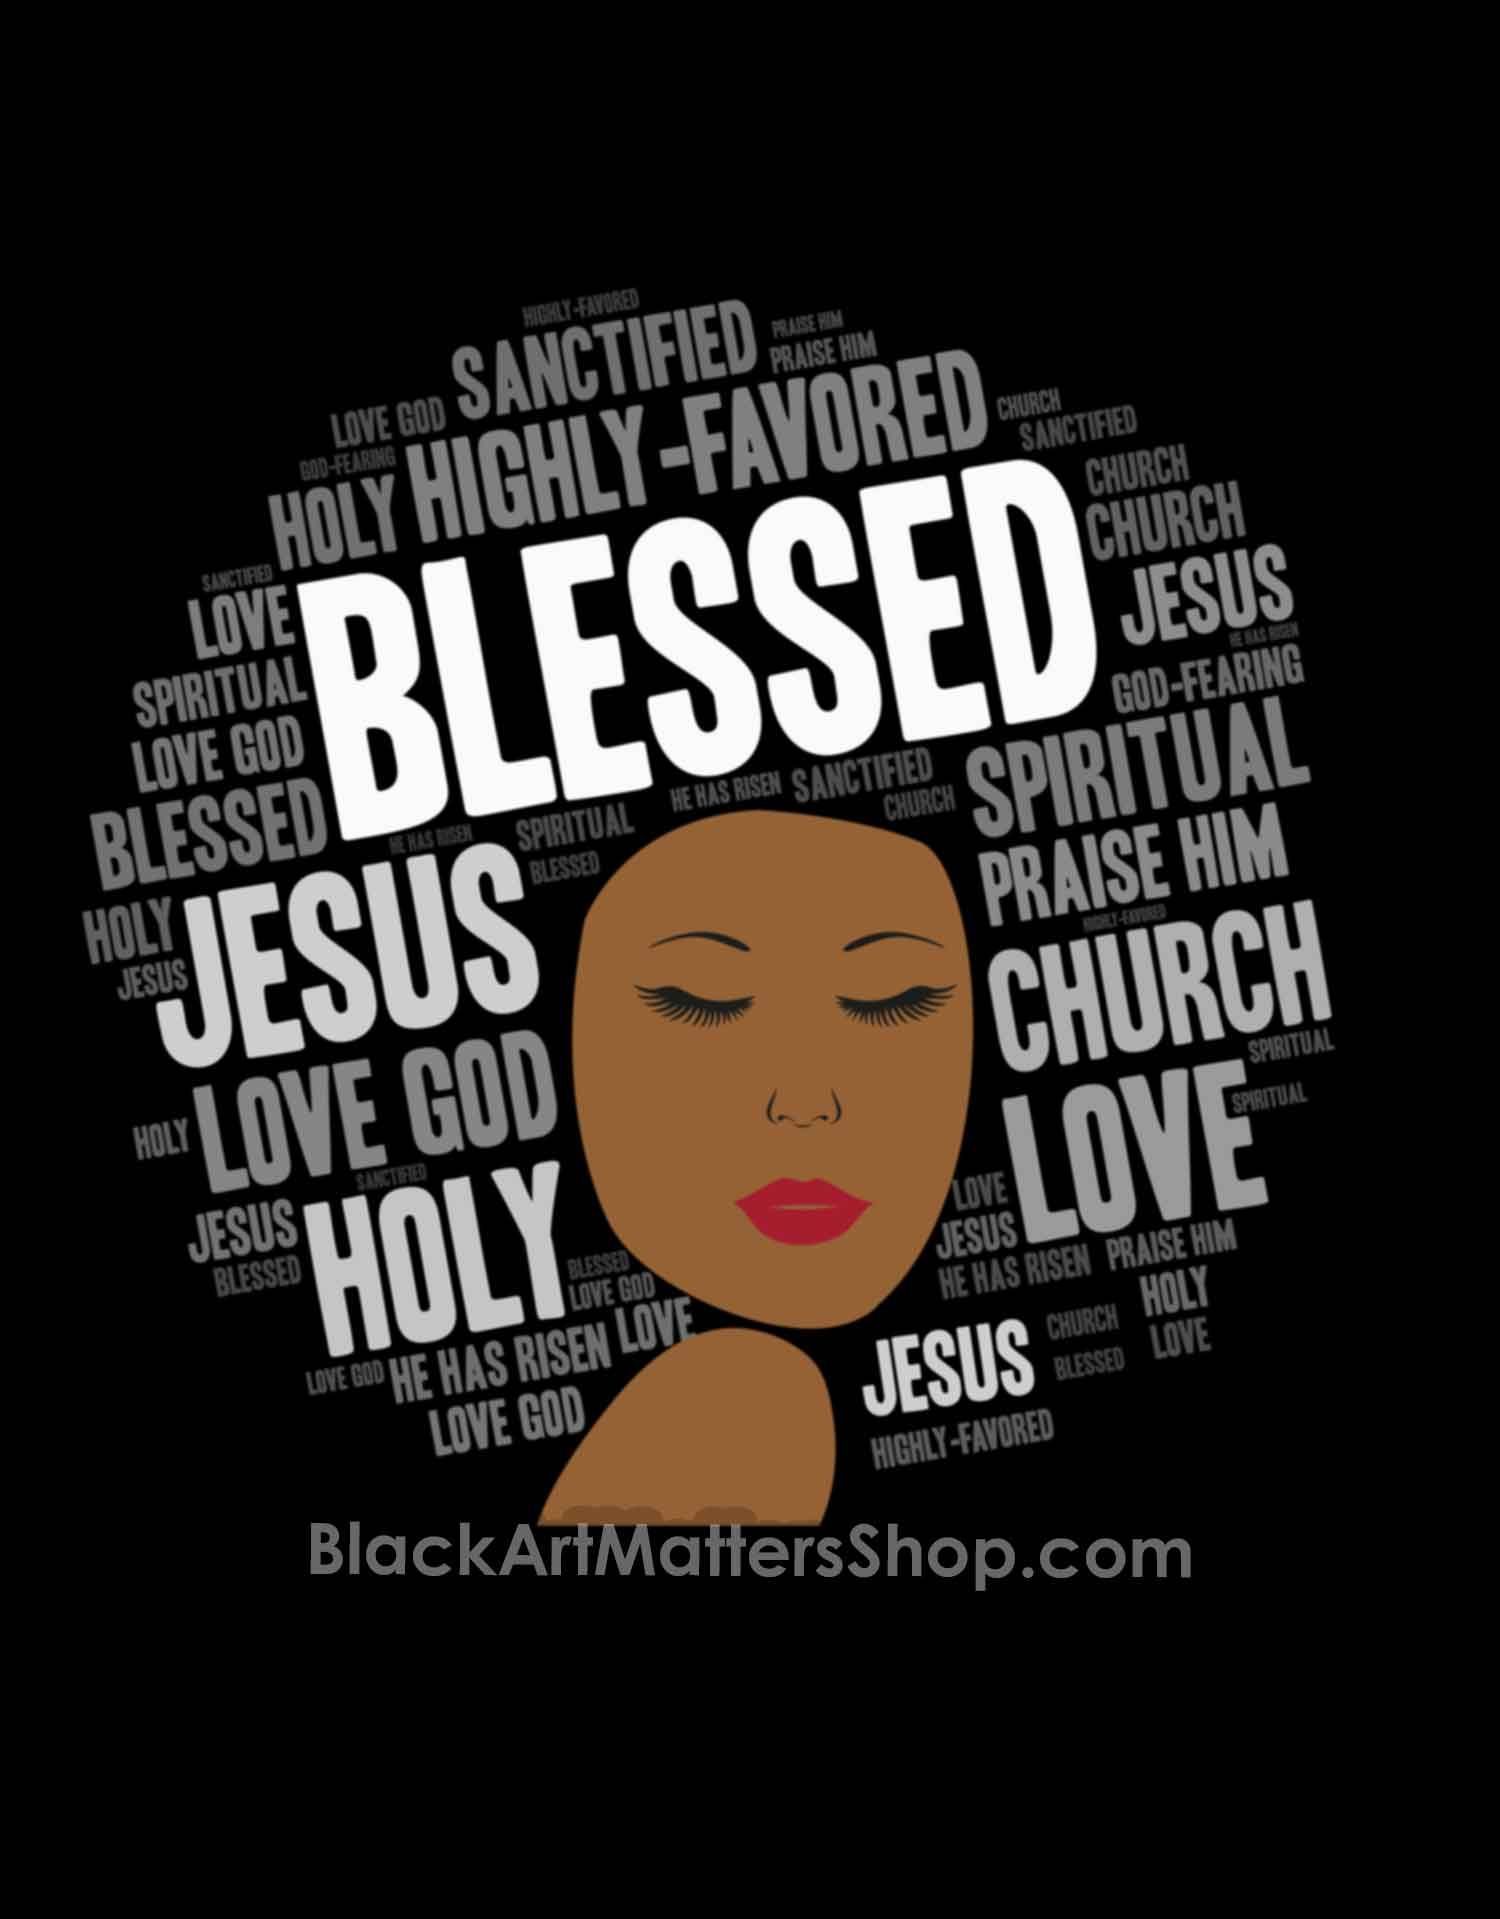 Reflections on the Black Exodus from White Evangelical Spaces